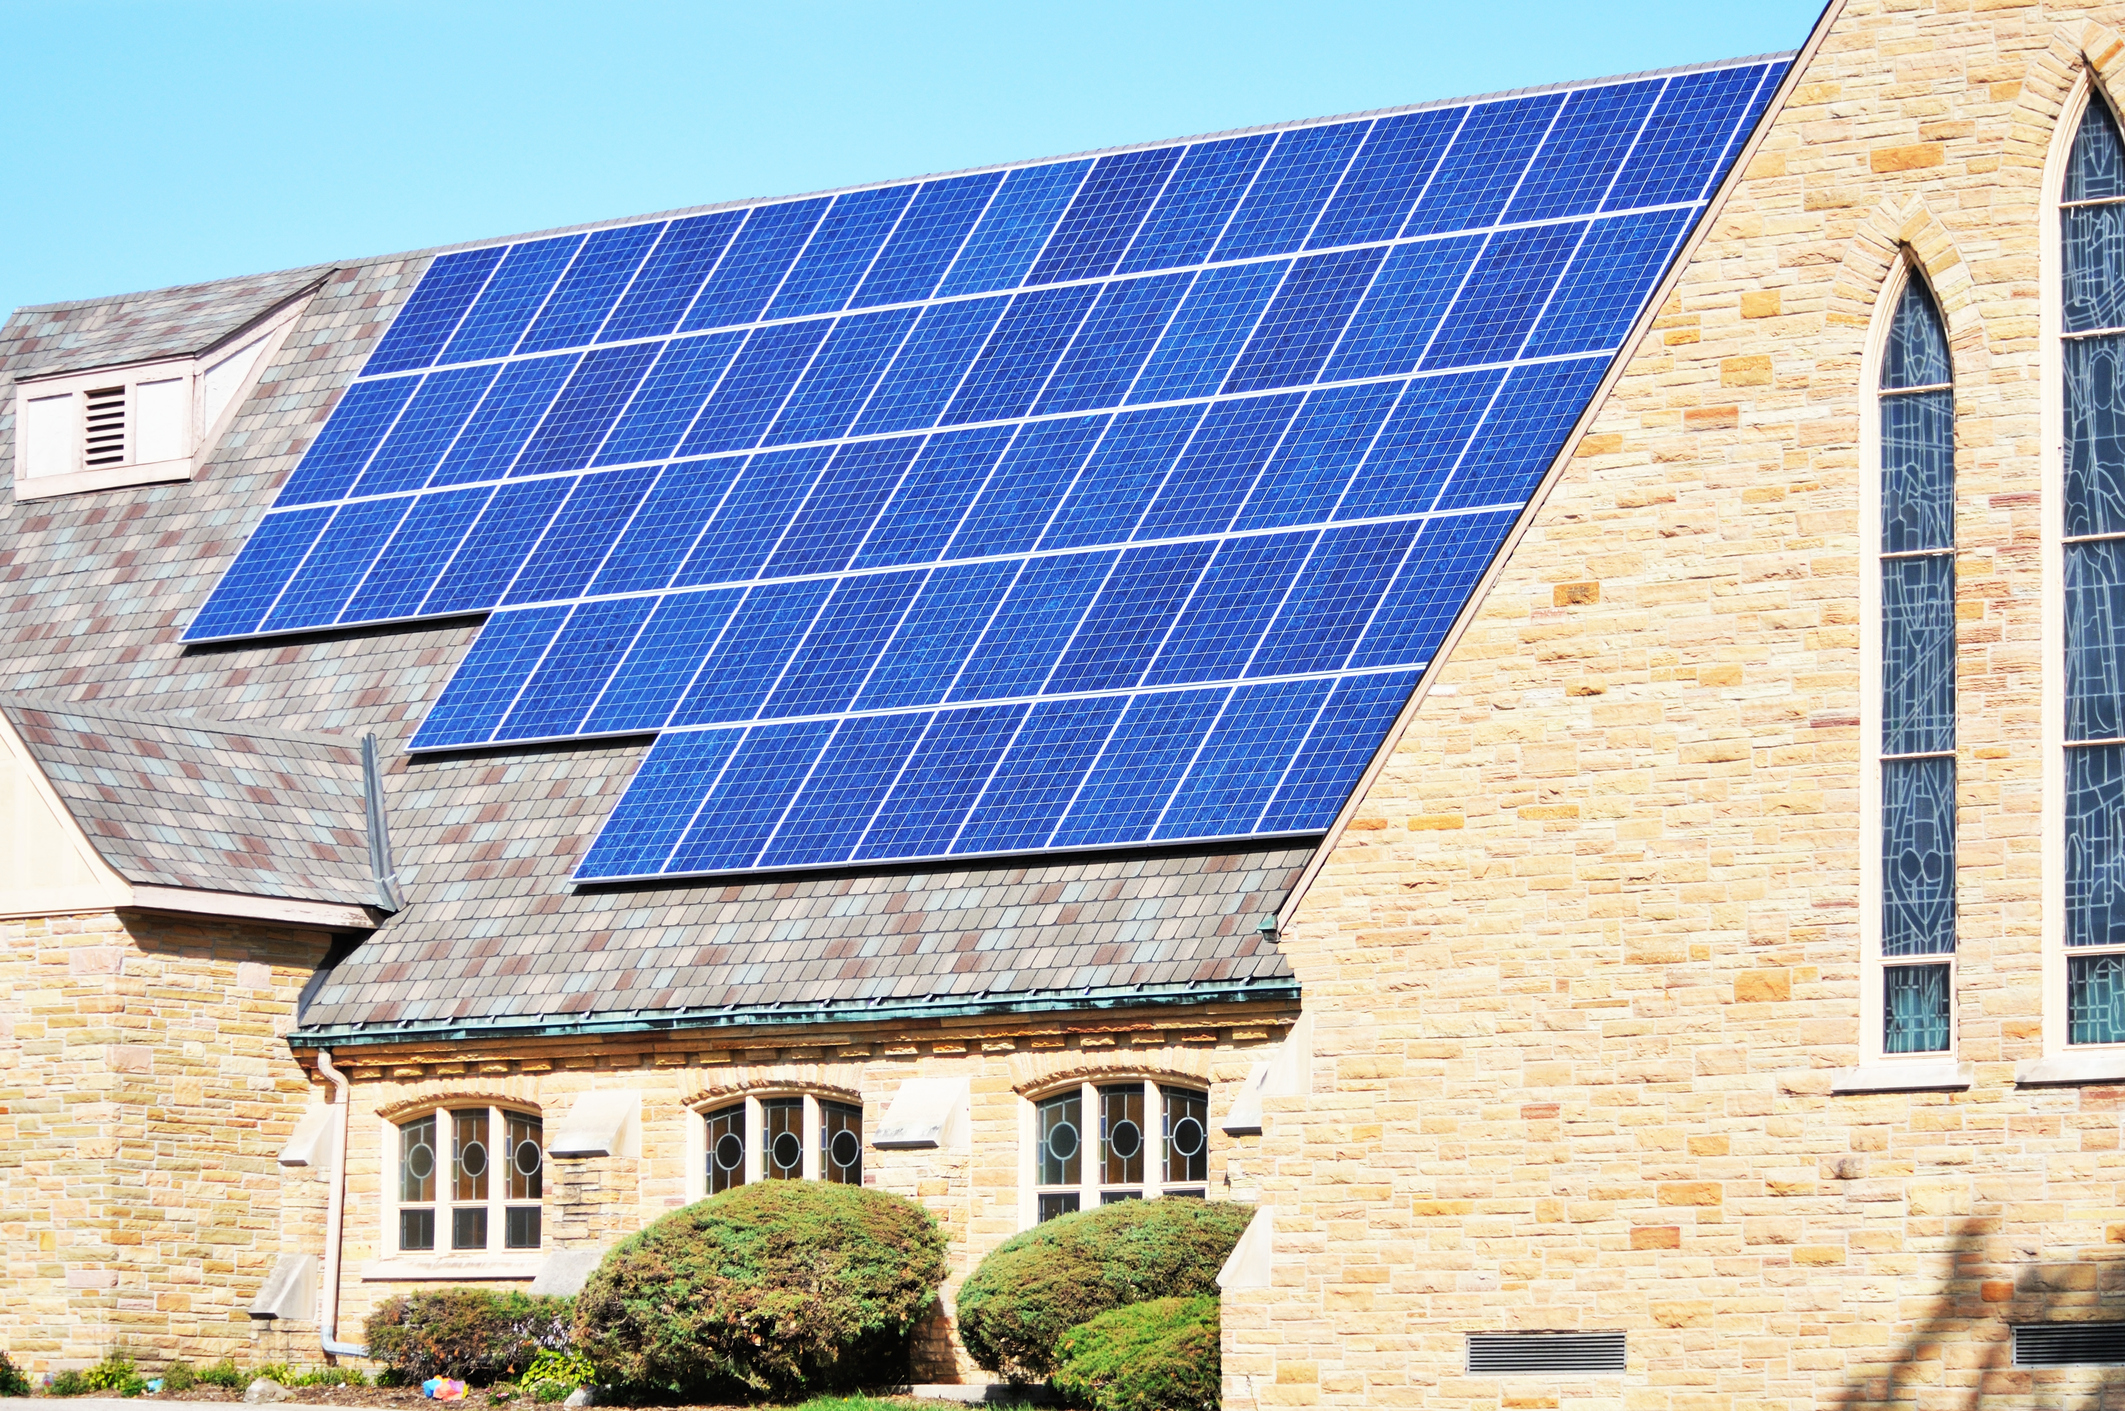 An Episcopal church with solar panels on the roof.